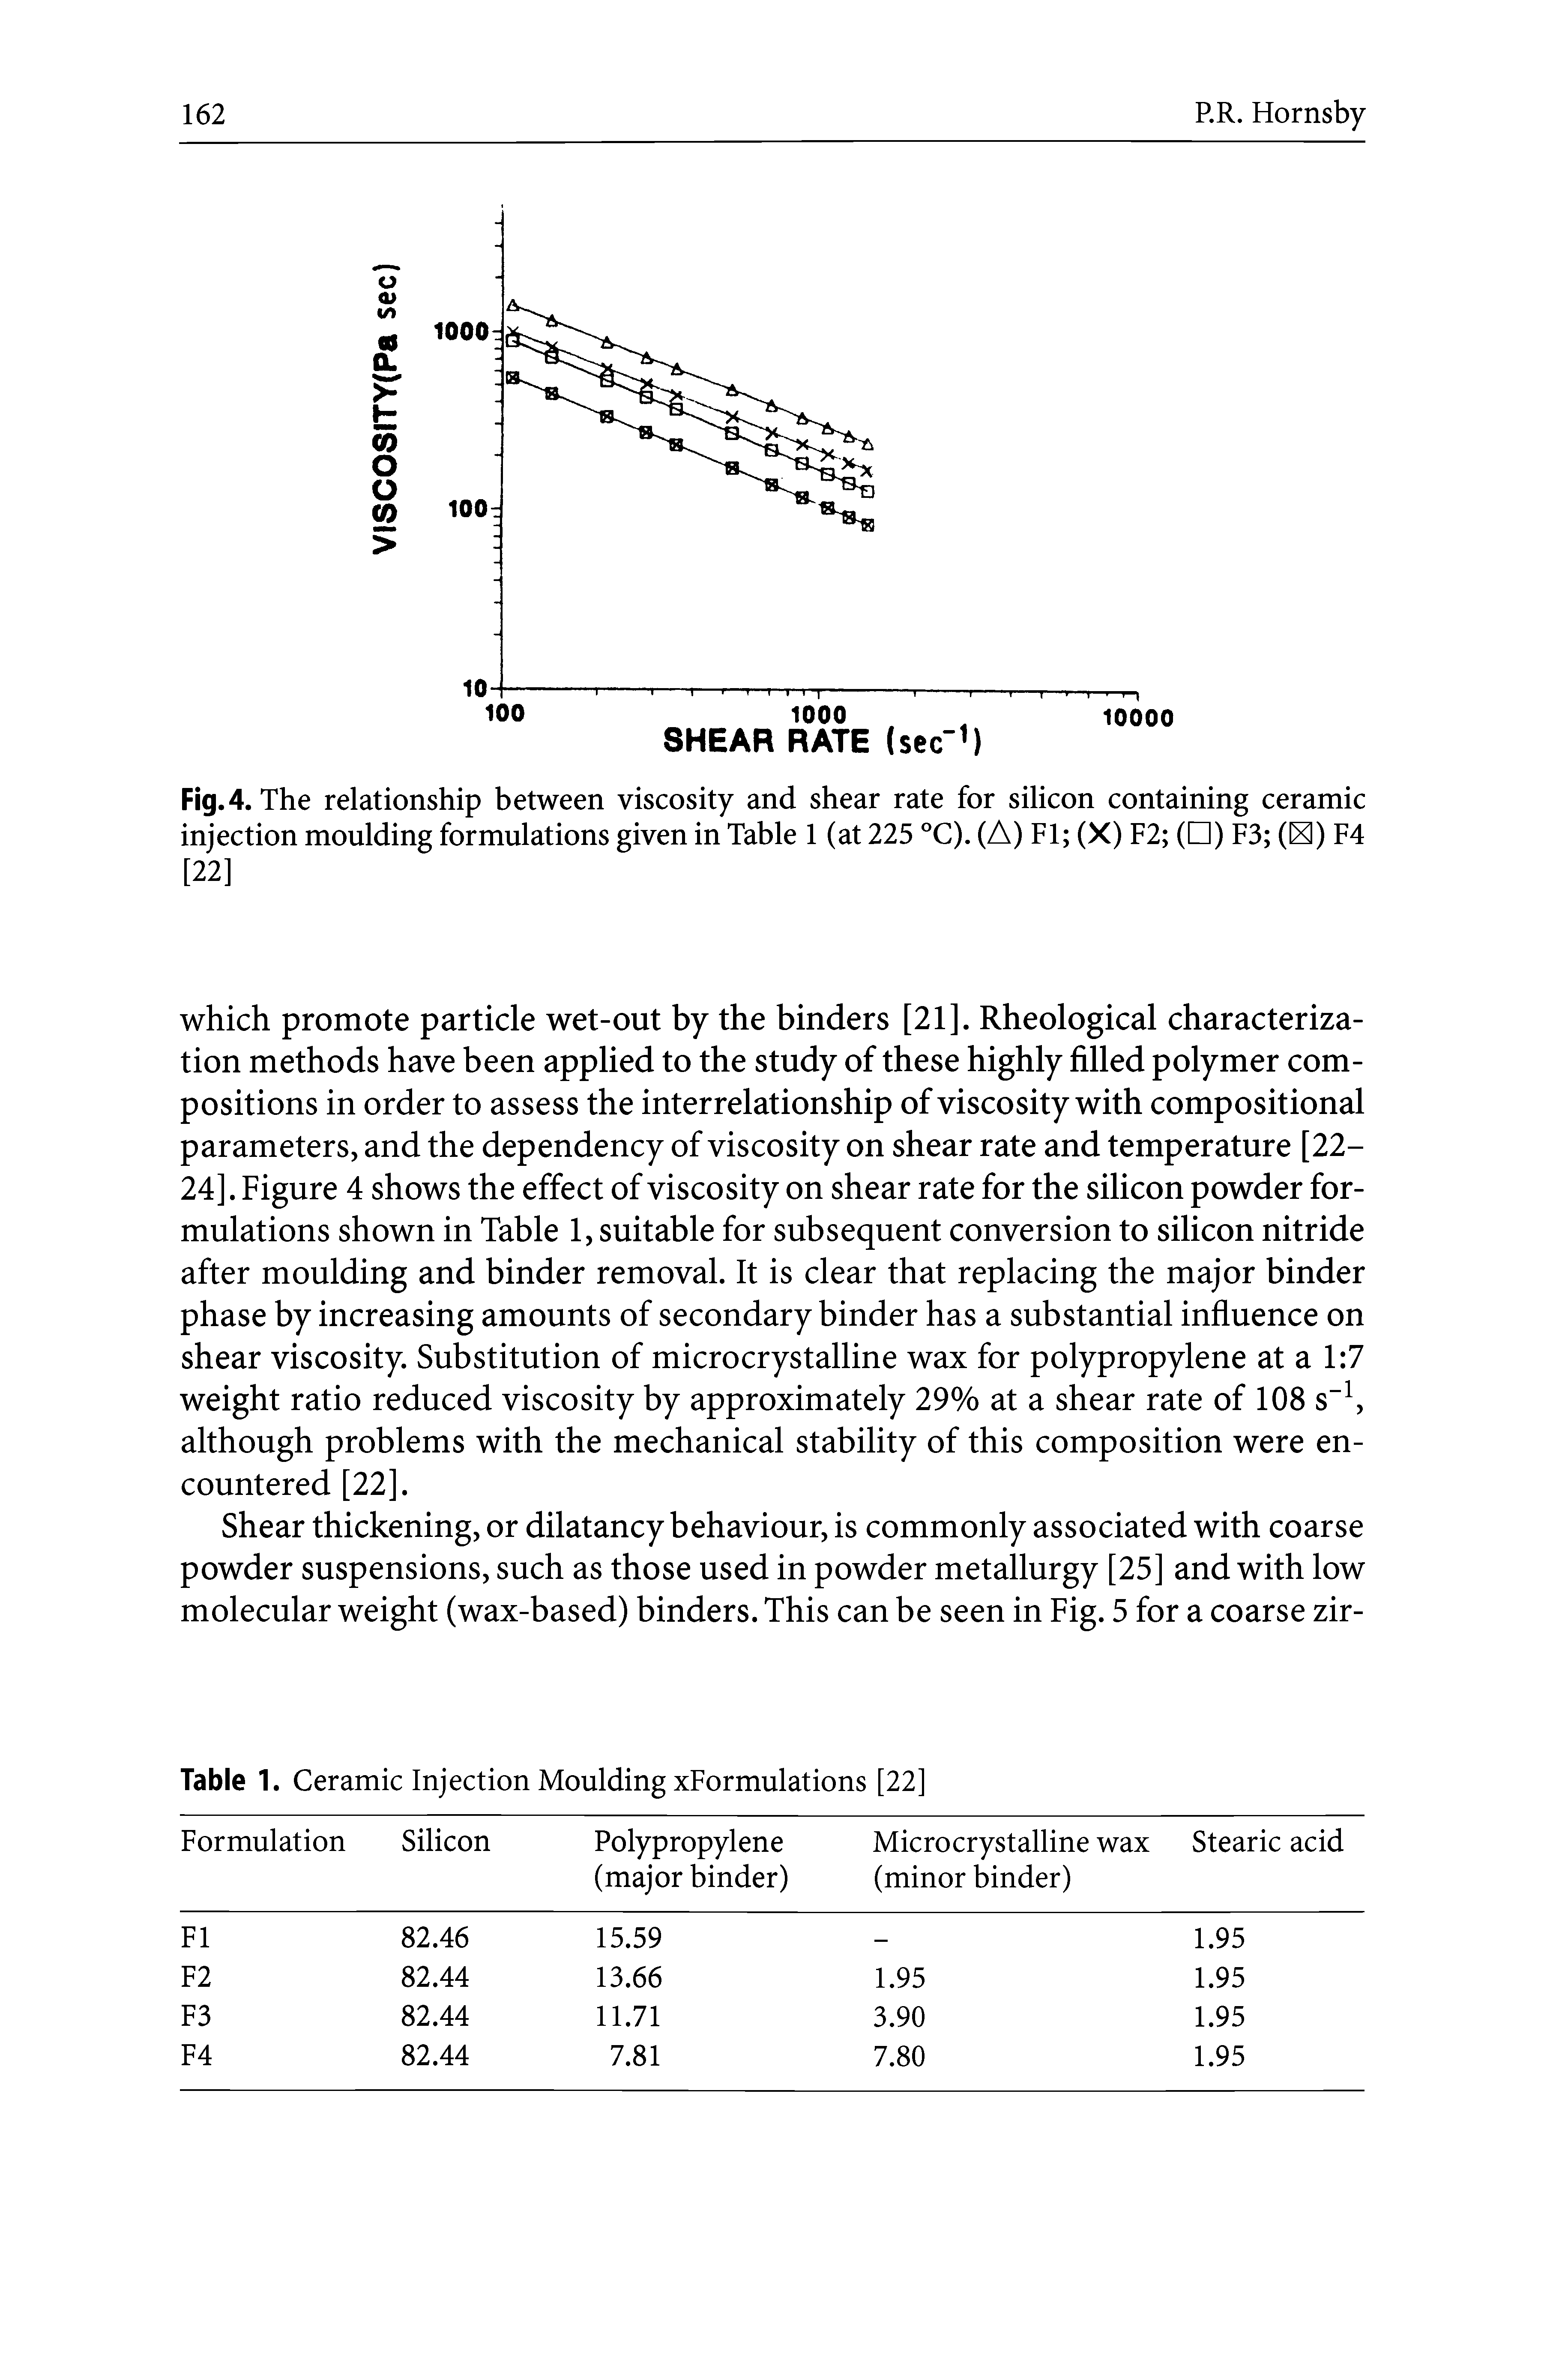 Fig.4. The relationship between viscosity and shear rate for silicon containing ceramic injection moulding formulations given in Table 1 (at 225 °C). (A) FI (X) F2 ( ) F3 (M) F4 [22]...